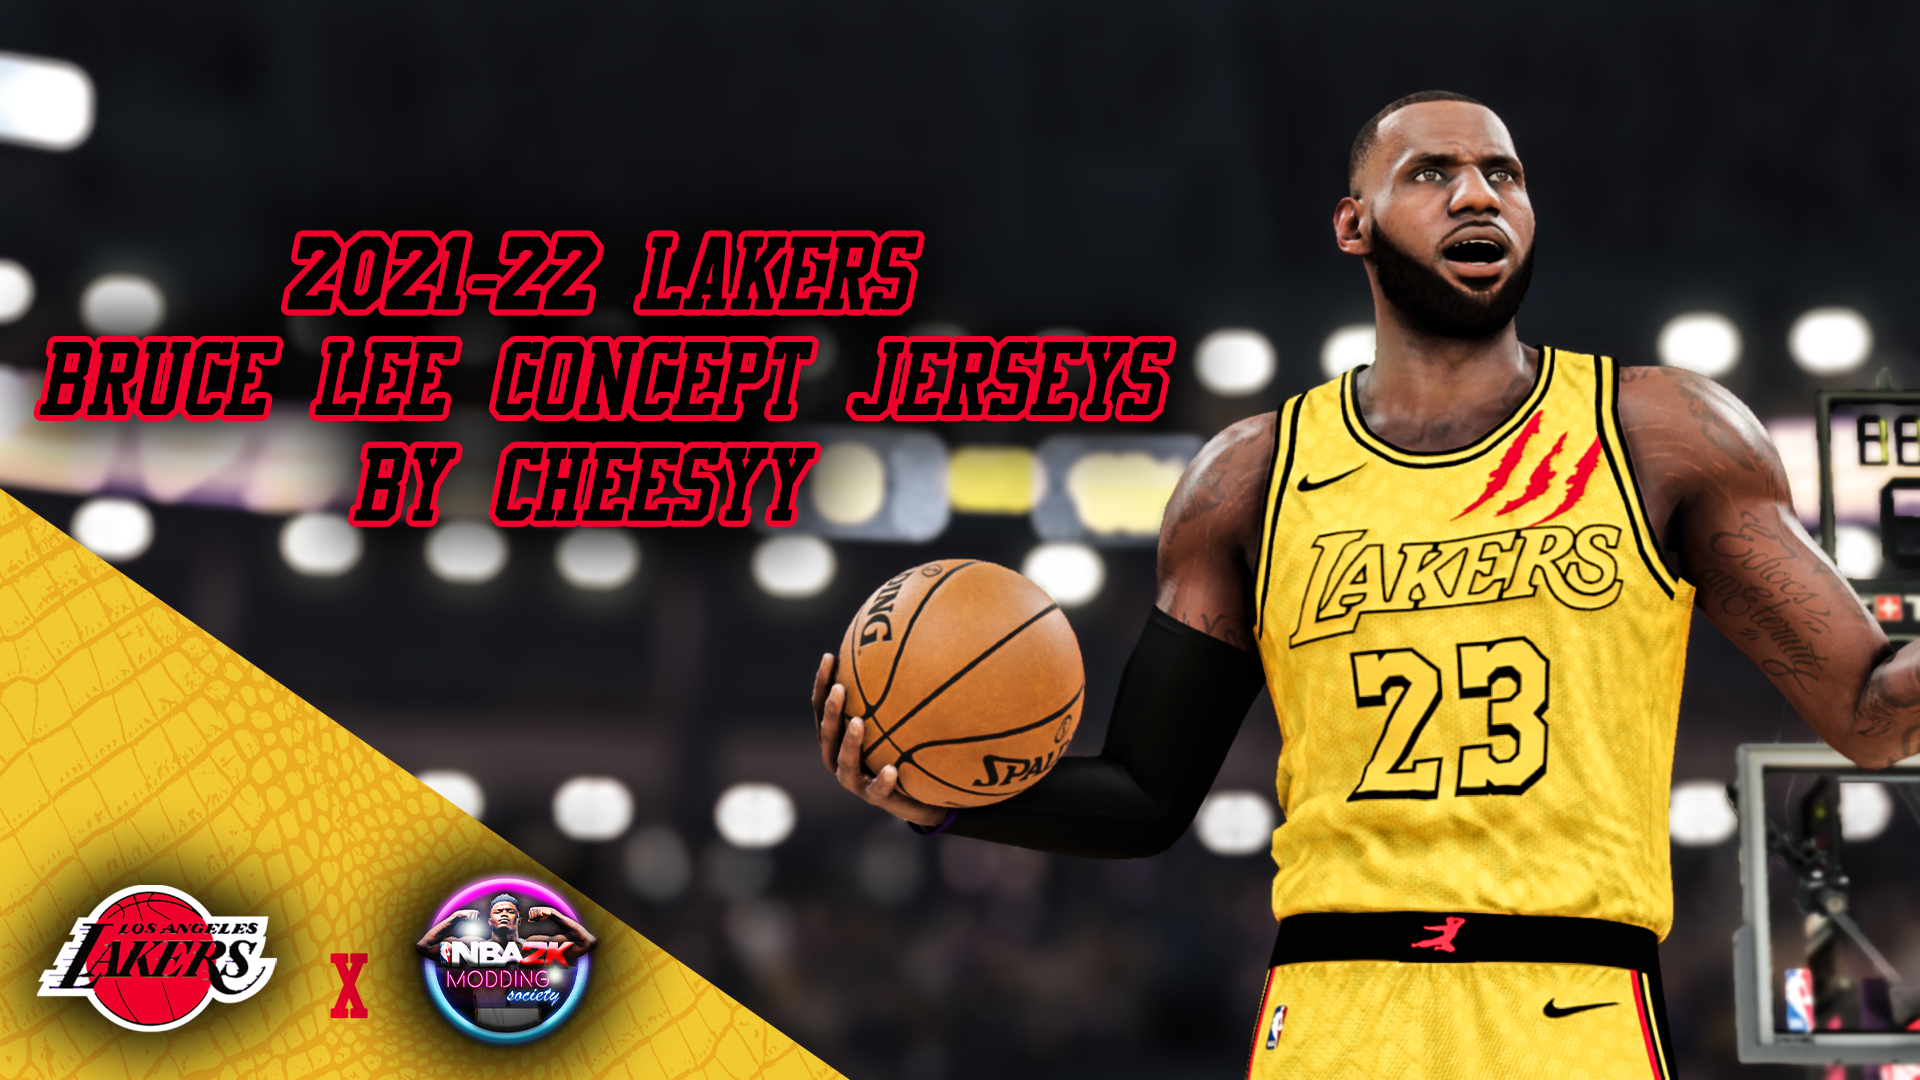 NBA 2K21 2021 2022 Los Angeles Lakers Bruce Lee Concept Jerseys By Cheesyy: NBA 2K22 Mods, Rosters & Cyberfaces